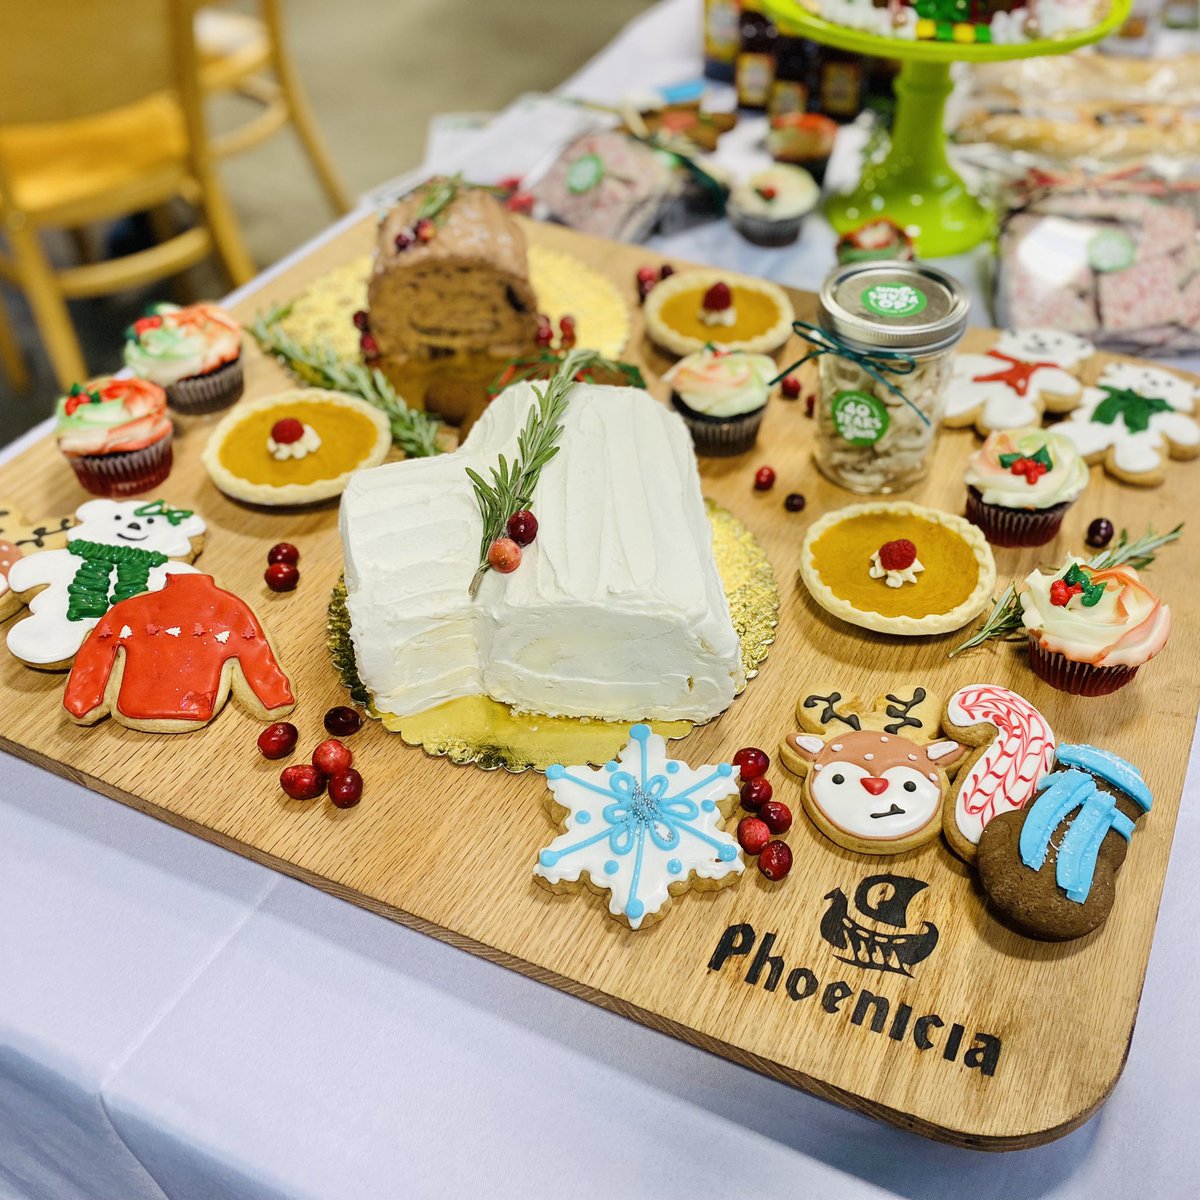 YUMMY! Tidings to All! Visit our markets to find the perfect hosting essentials and baked goodies to gift this season!